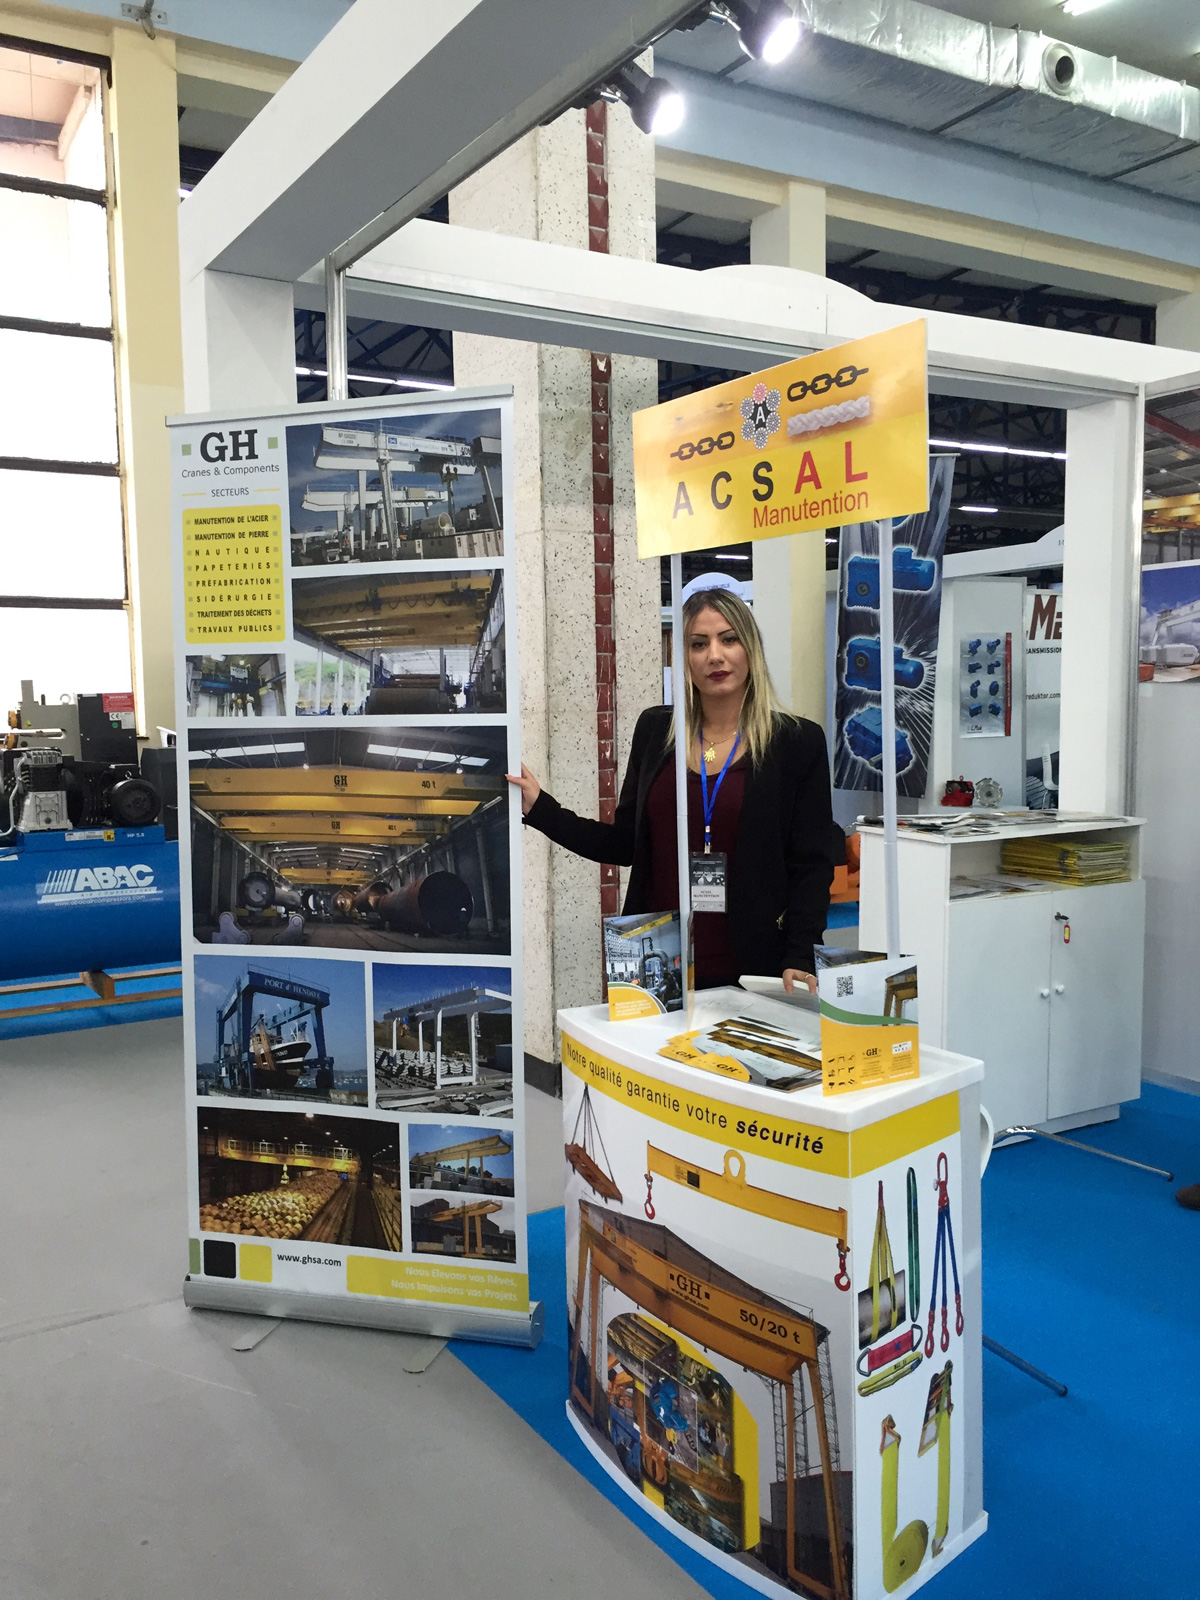 GH CRANES & COMPONENTS in Industry Exhibition 2015 in Algiers